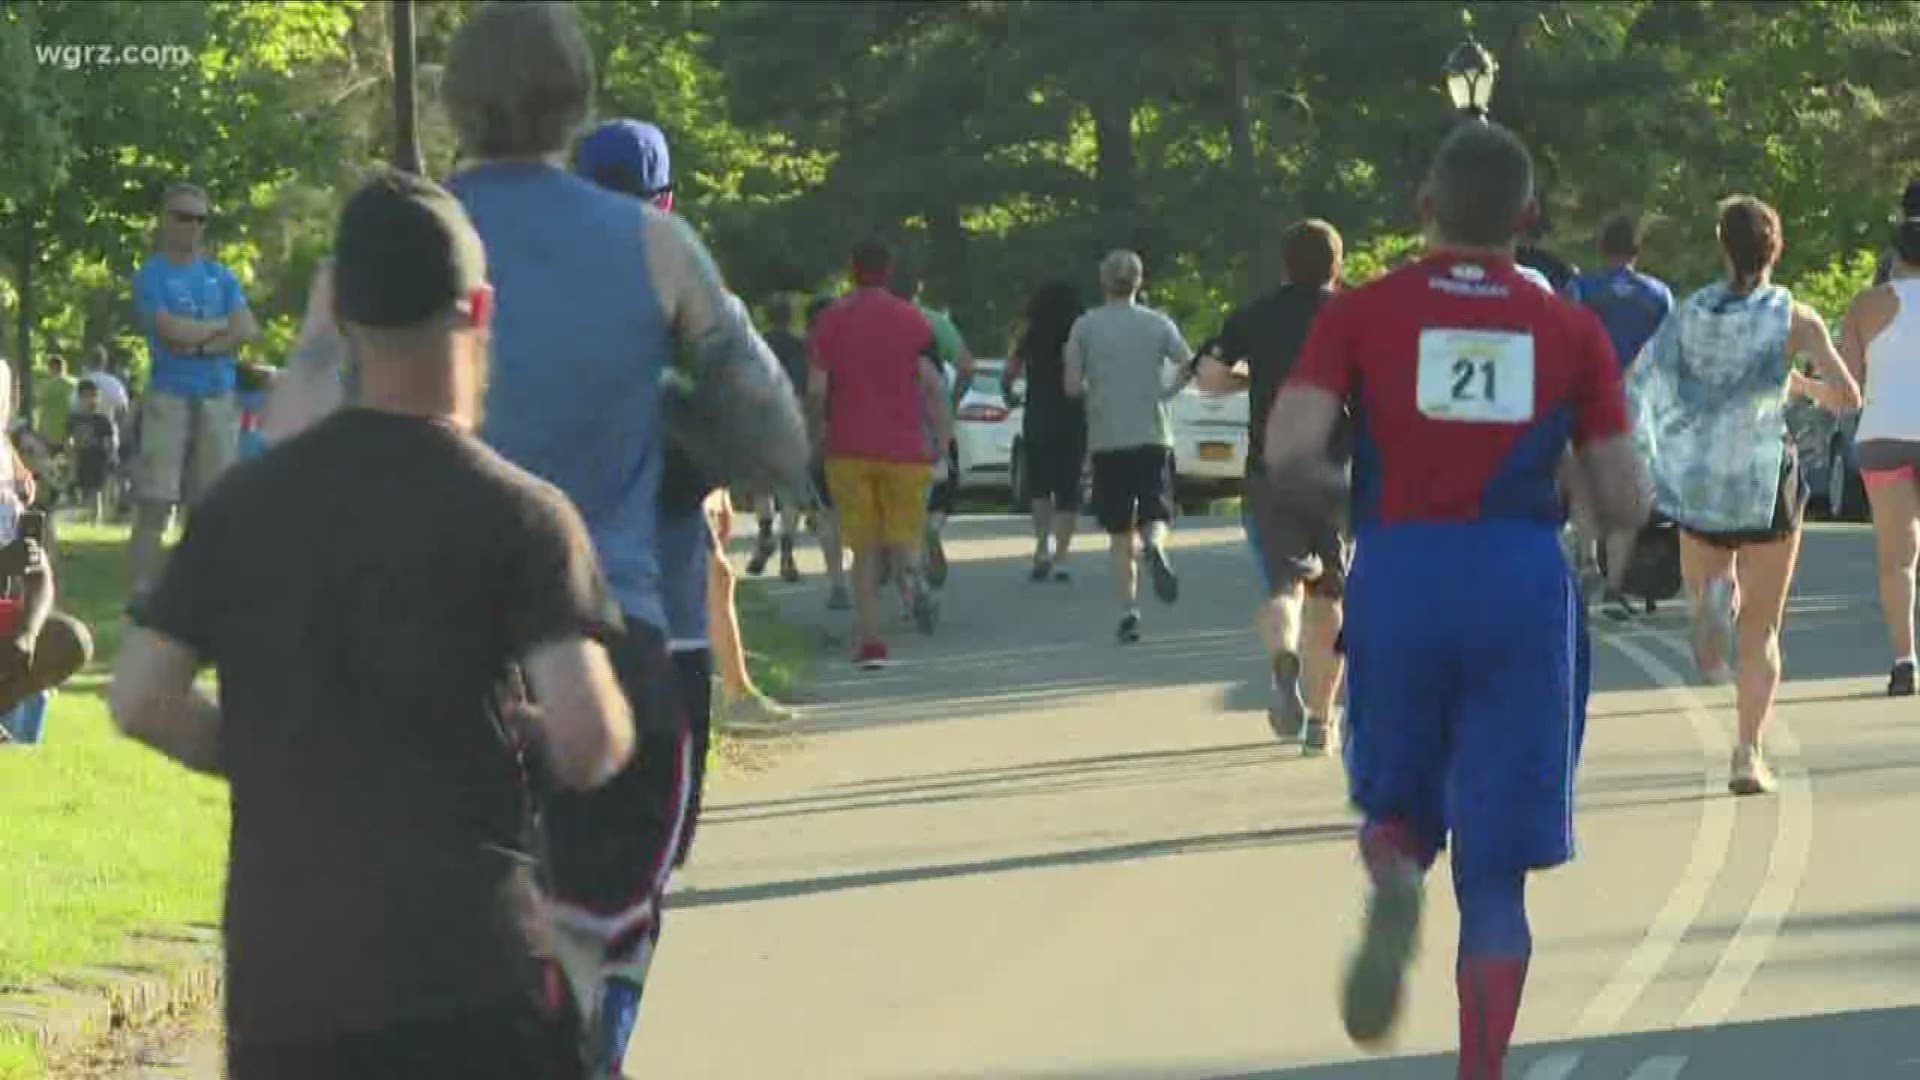 On Friday, you may have noticed some superheroes walking and running around Delaware Park in Buffalo.